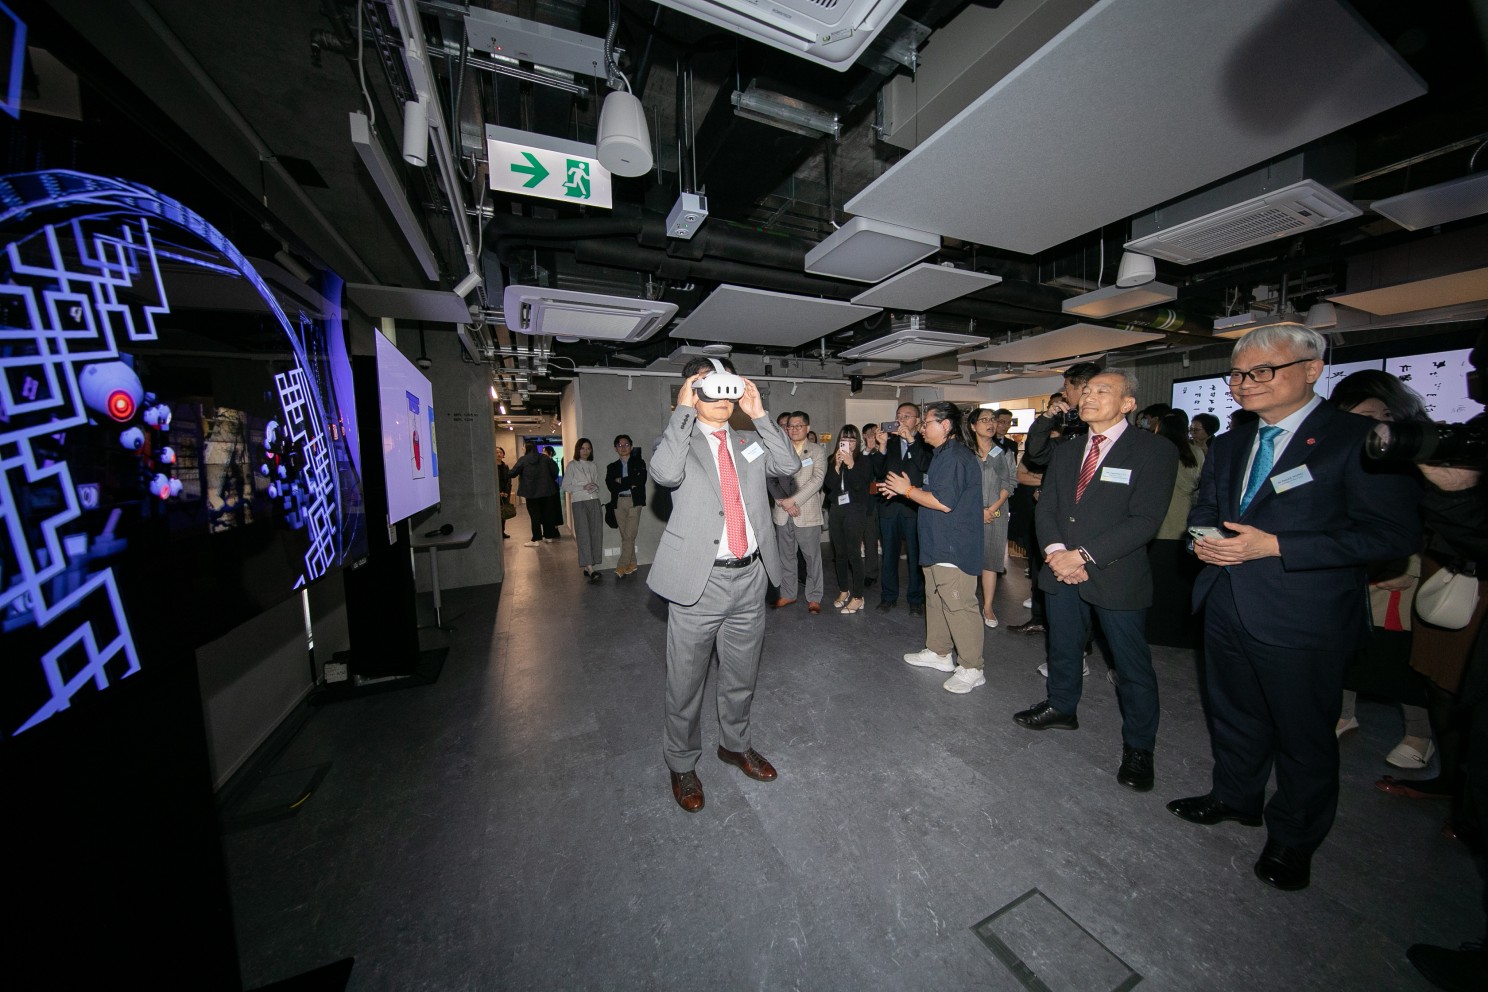 Lingnan holds opening ceremony for Lingnan@WestKowloon, featuring immersive digital art exhibition to explore cultural heritage in the GBA transportation hub